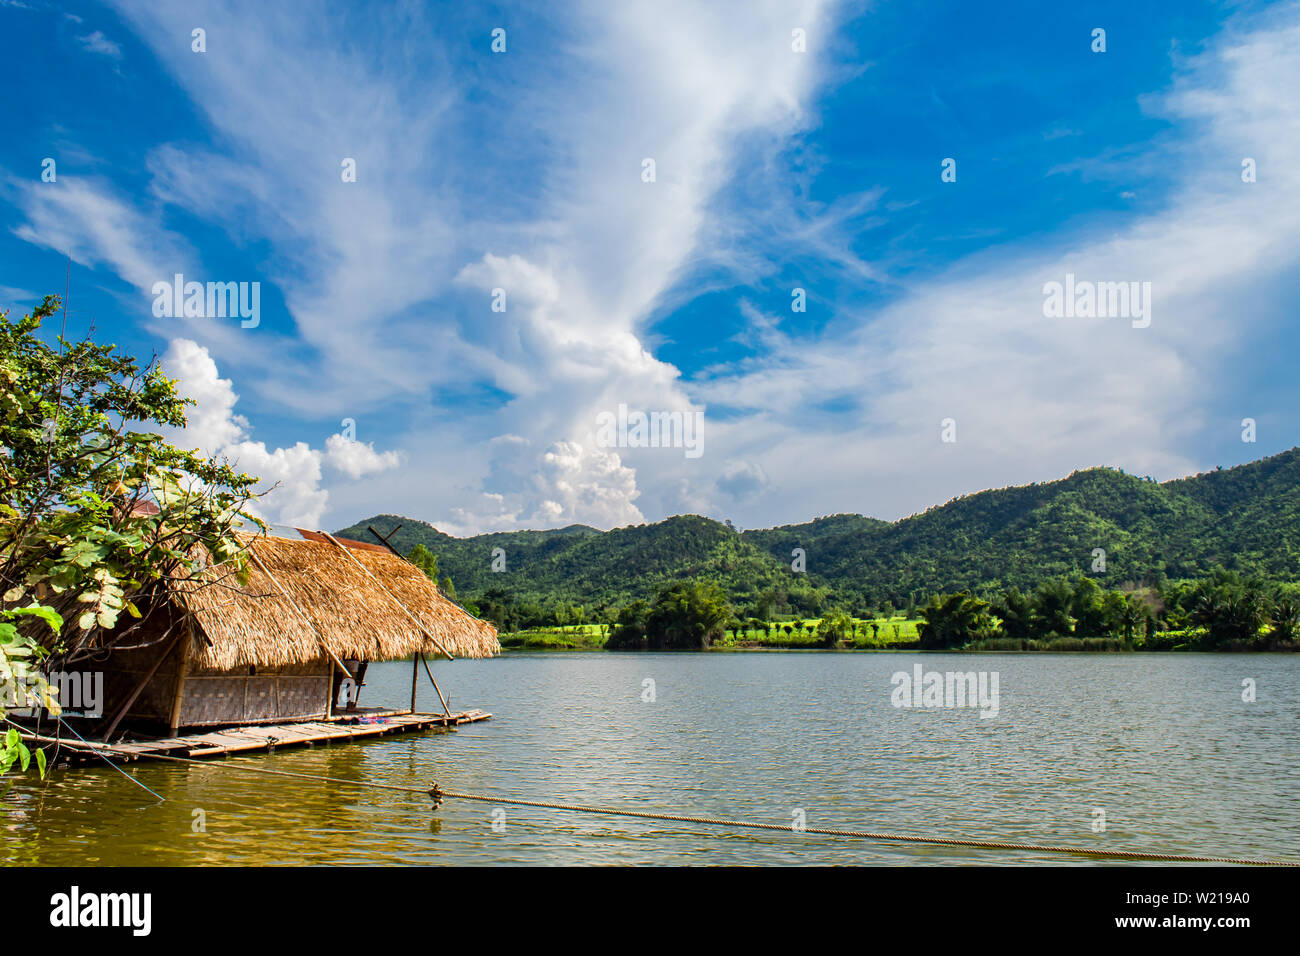 The wooden raft in the water reservoirs and mountain views. Stock Photo